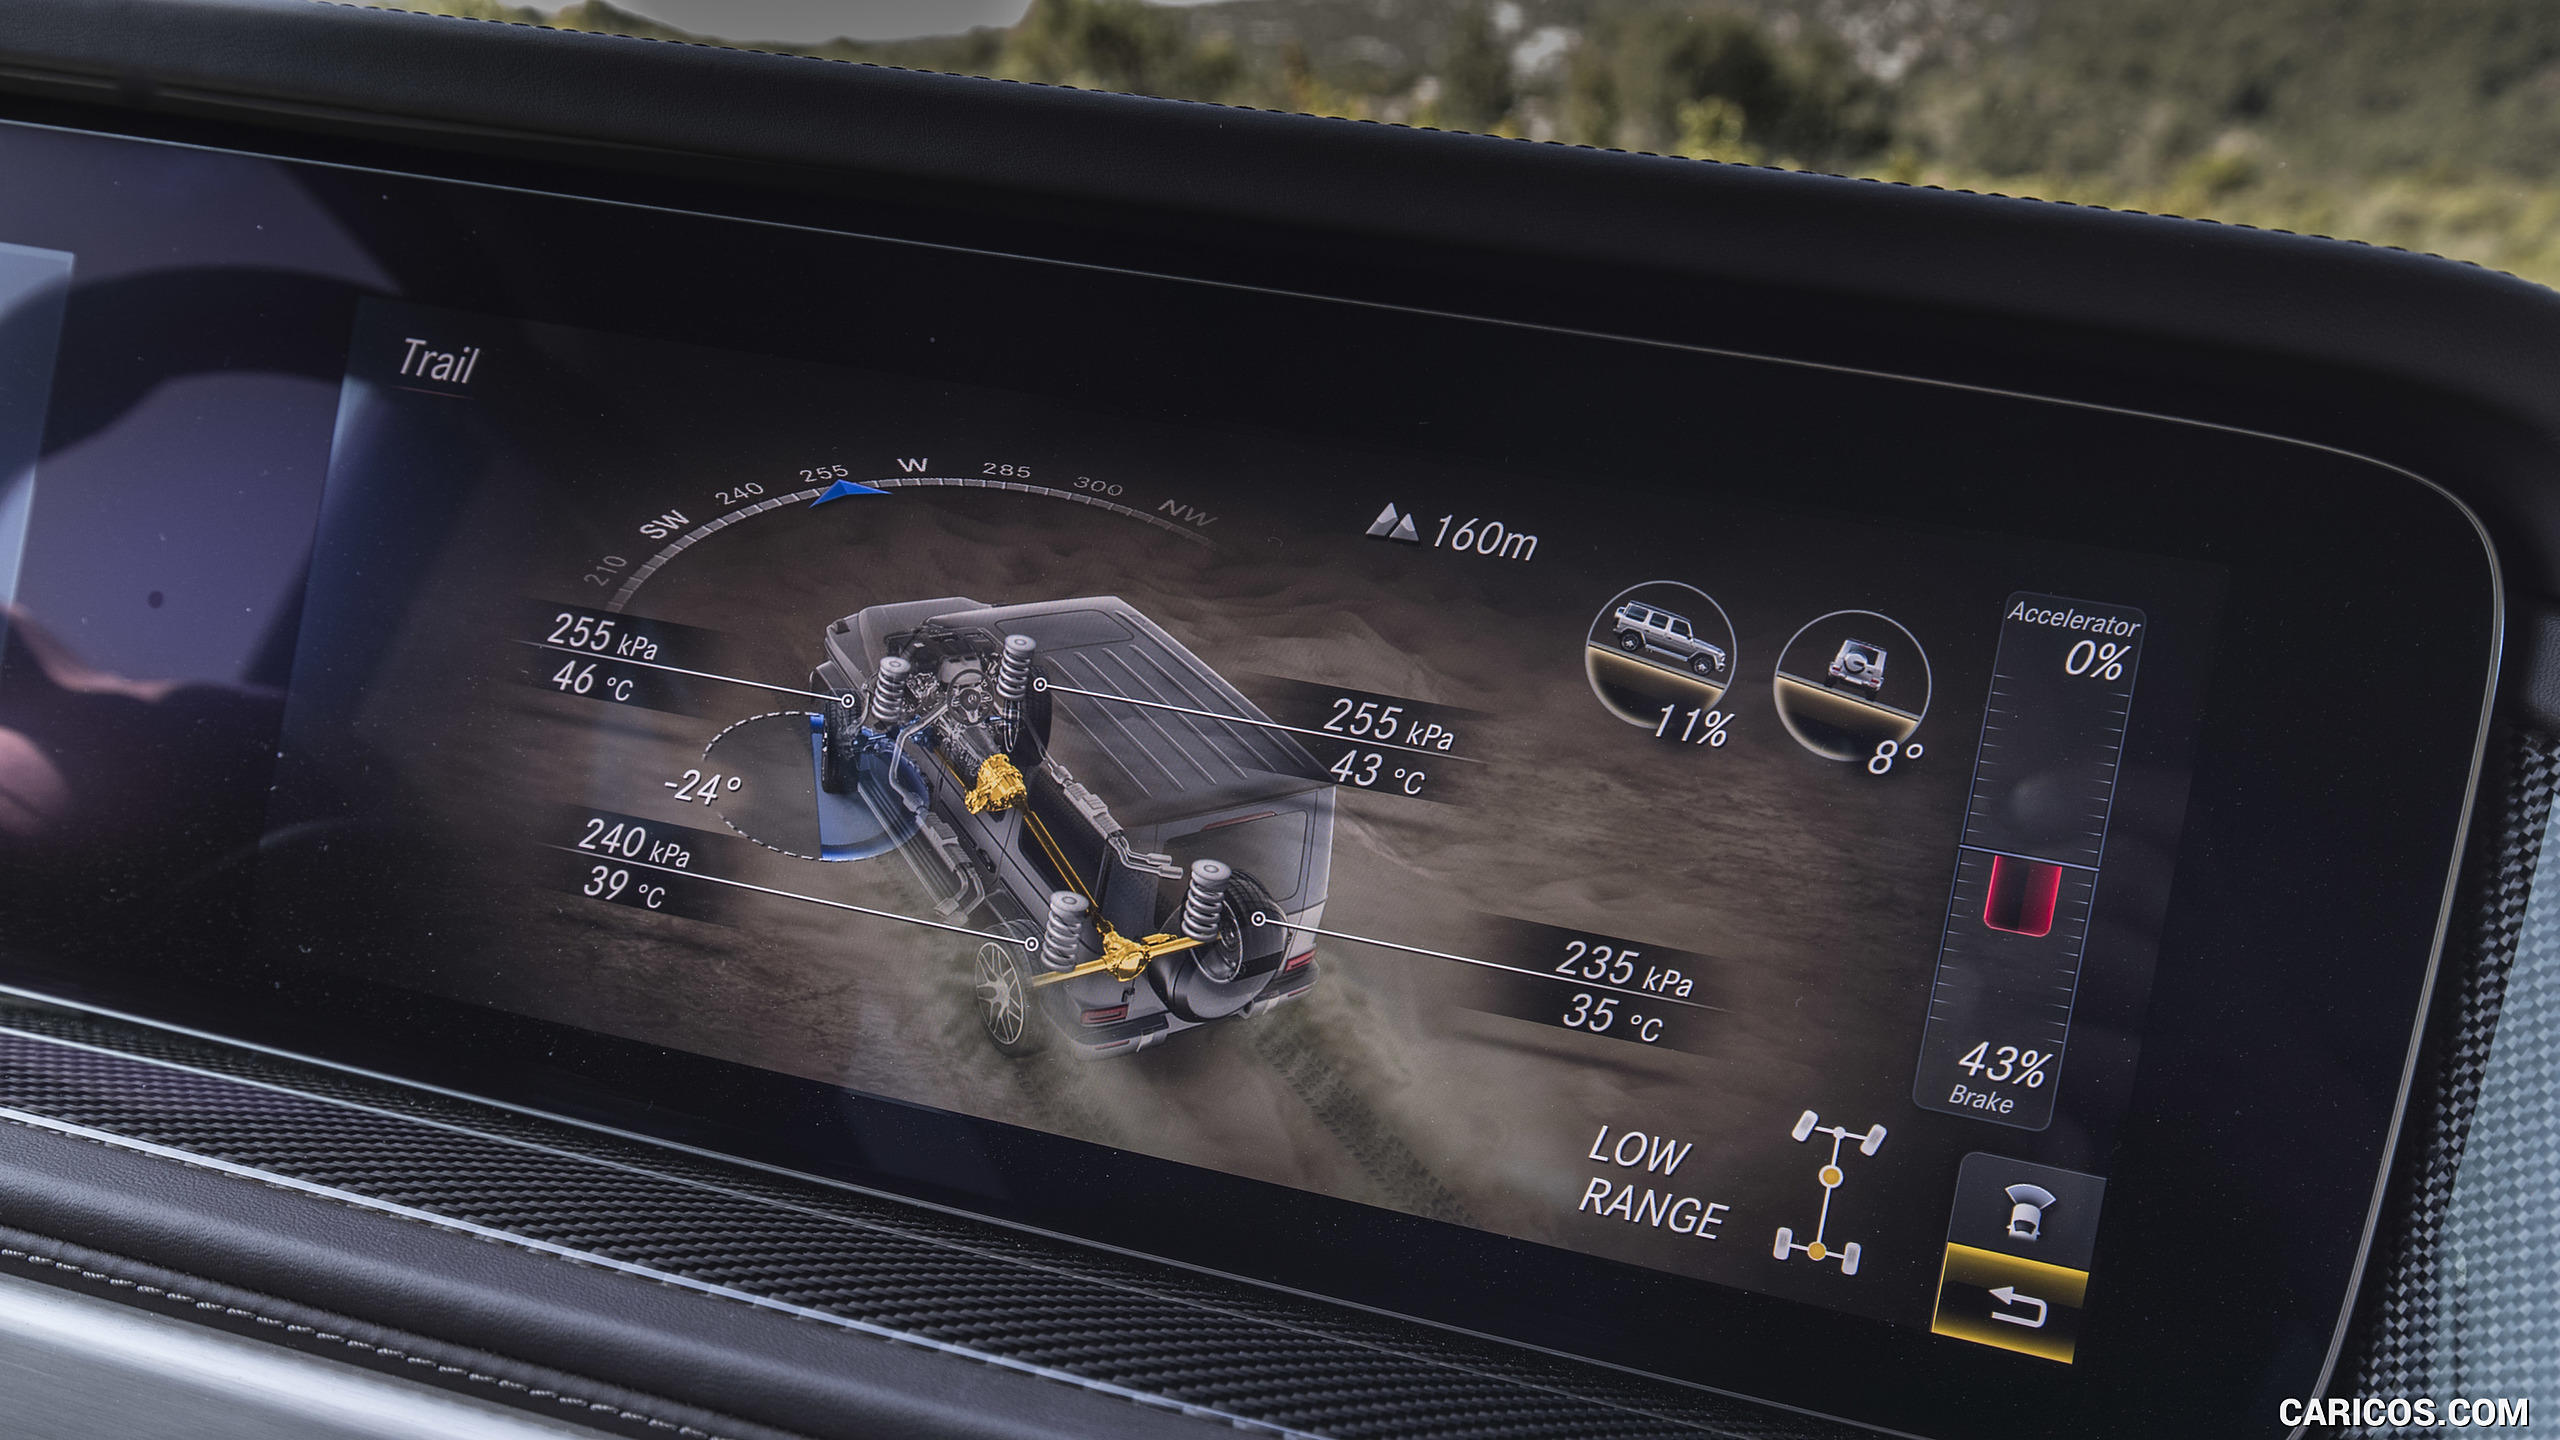 2019 Mercedes-AMG G63 - Central Console, #213 of 452